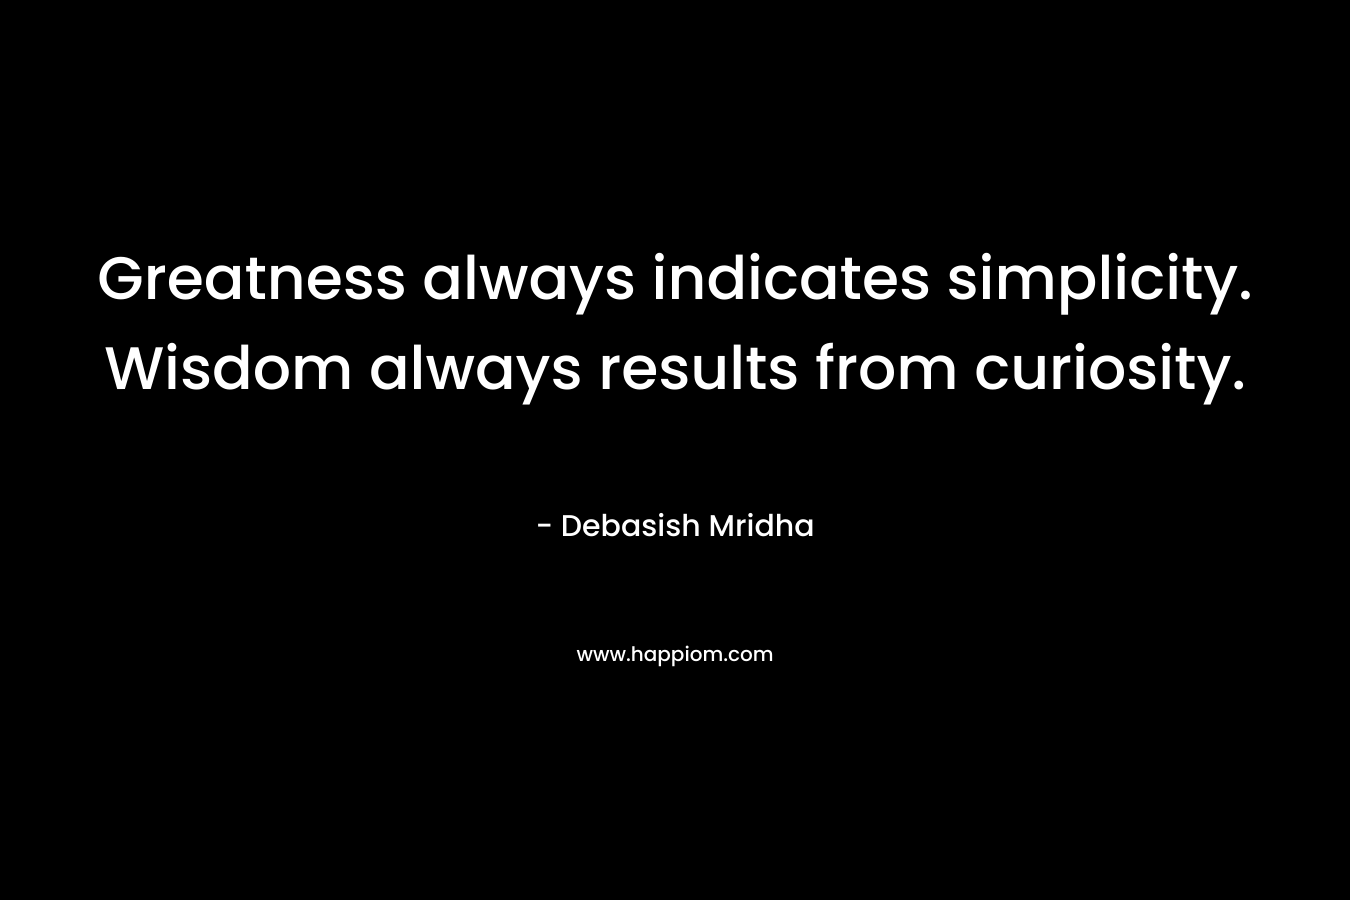 Greatness always indicates simplicity. Wisdom always results from curiosity.